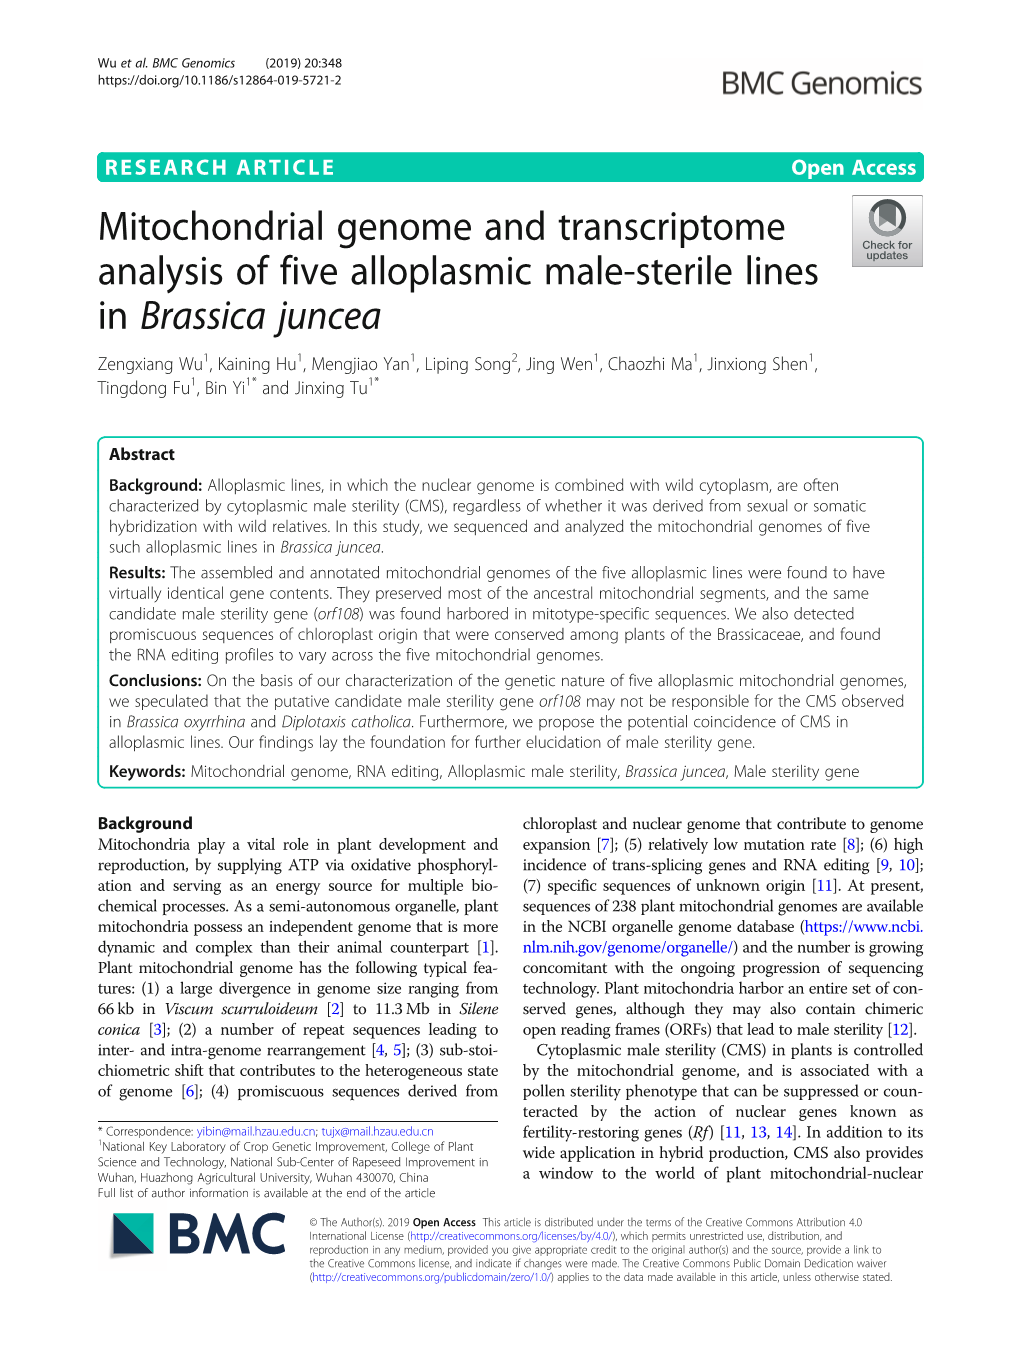 Mitochondrial Genome and Transcriptome Analysis of Five